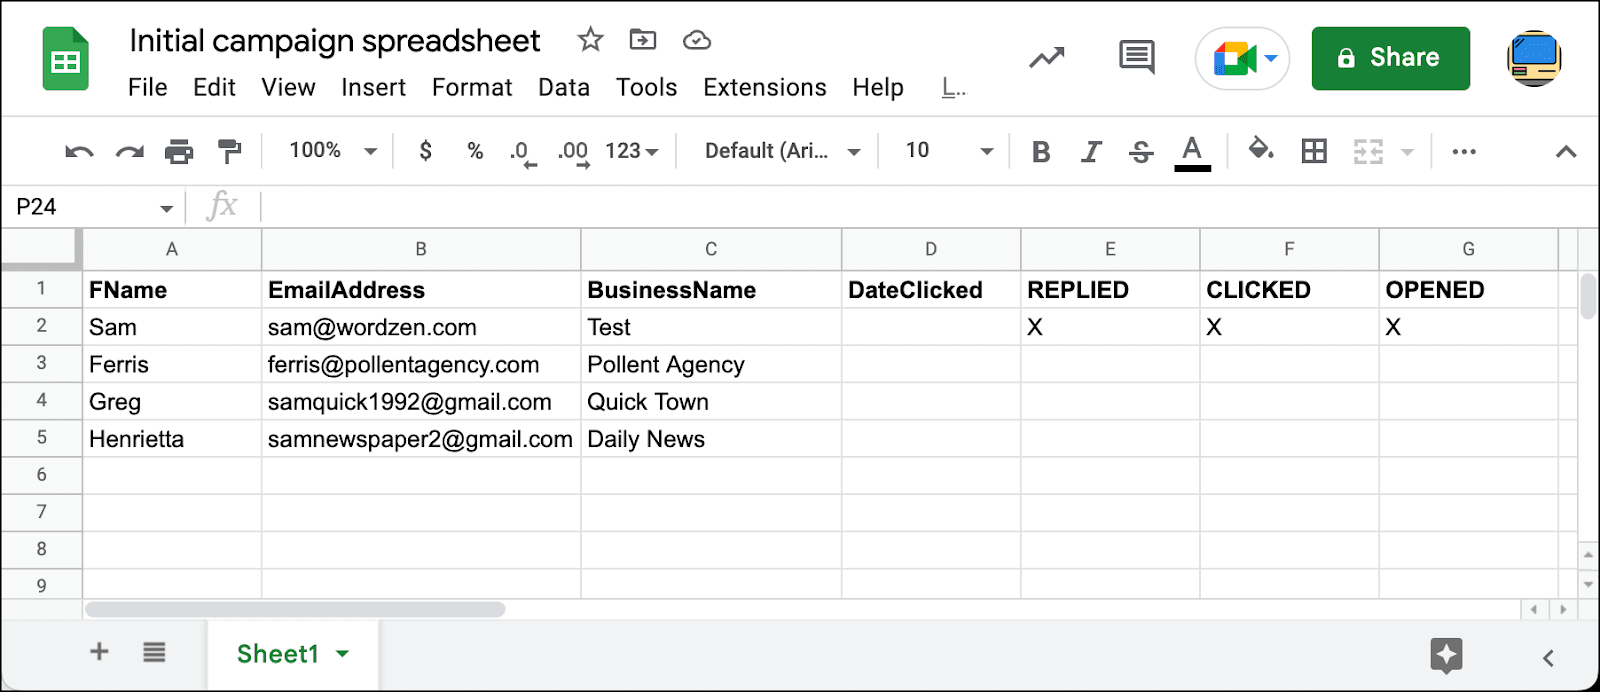 Data automatically inserted into sheet by GMass